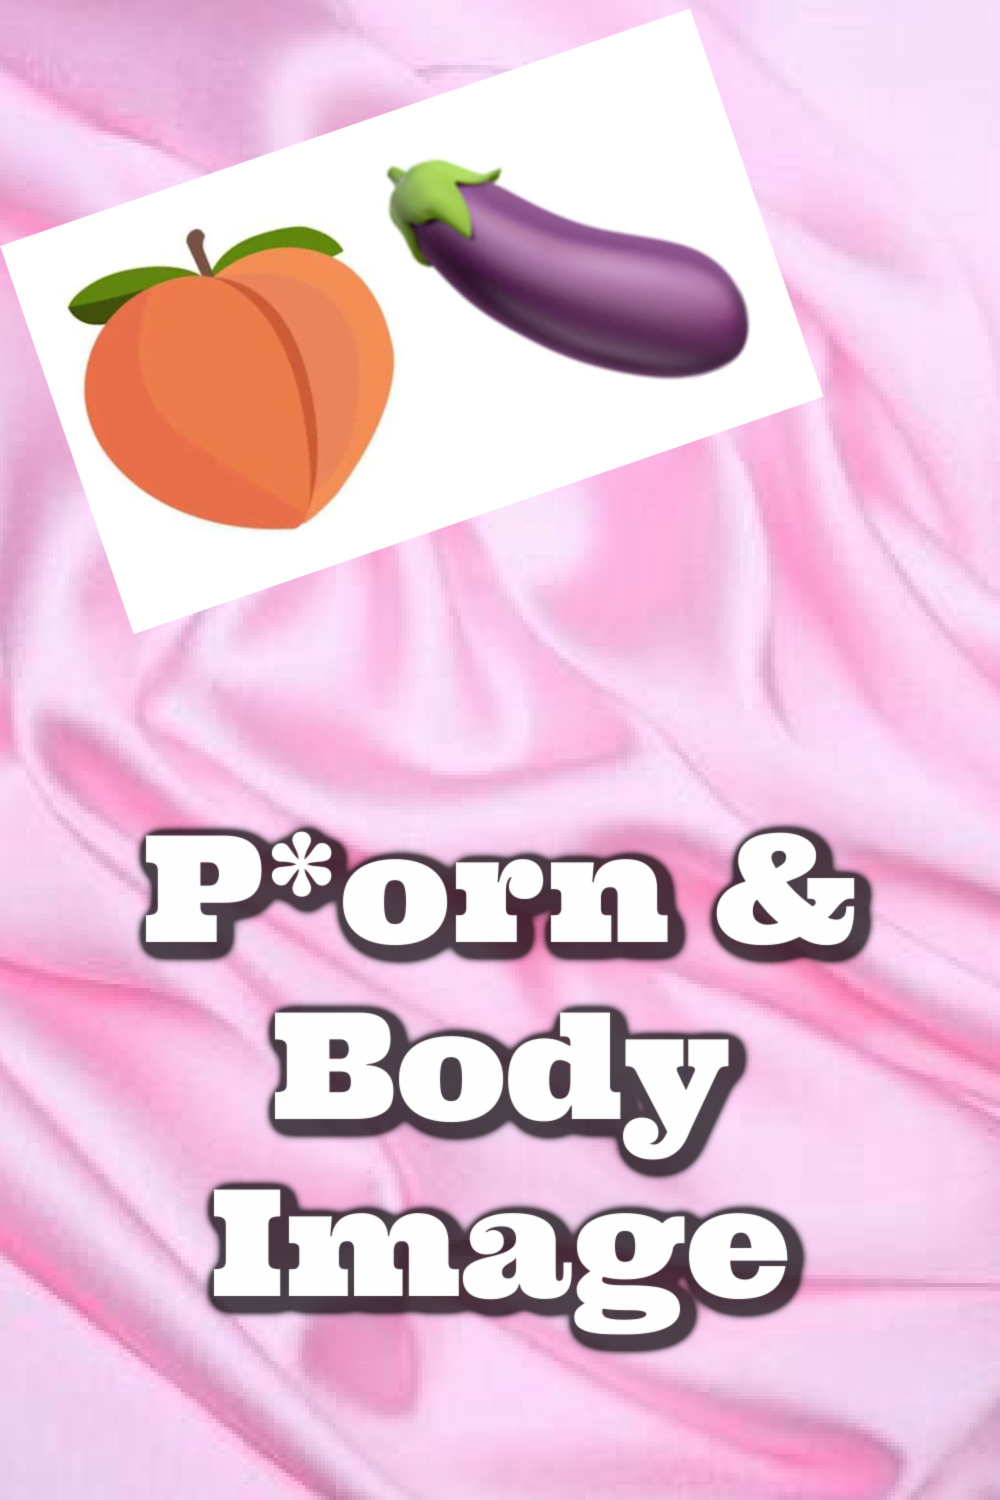 porn and body image, porn and the media, porn is killing your relationship, porn and womens body image, relationship advice for couples, oversexualization, oversexualization in media, porn sex vs real sex, media manipulation, relationship advice for men, relationship advice for women, is porn real, understanding masculine and feminine energy, understanding masculine and feminine energy beginners guide, feminine and masculine energy in relationships, difference between feminine and masculine energy, divine masculine and feminine healing energy, feminine energy, feminine and masculine energy balance, feminine and masculine energy traits, feminine masculine energy, feminine energy vs masculine energy, masculine energy, masculine energy vs feminine energy, masculine vs feminine, Everyday starlet, sarah blodgett,